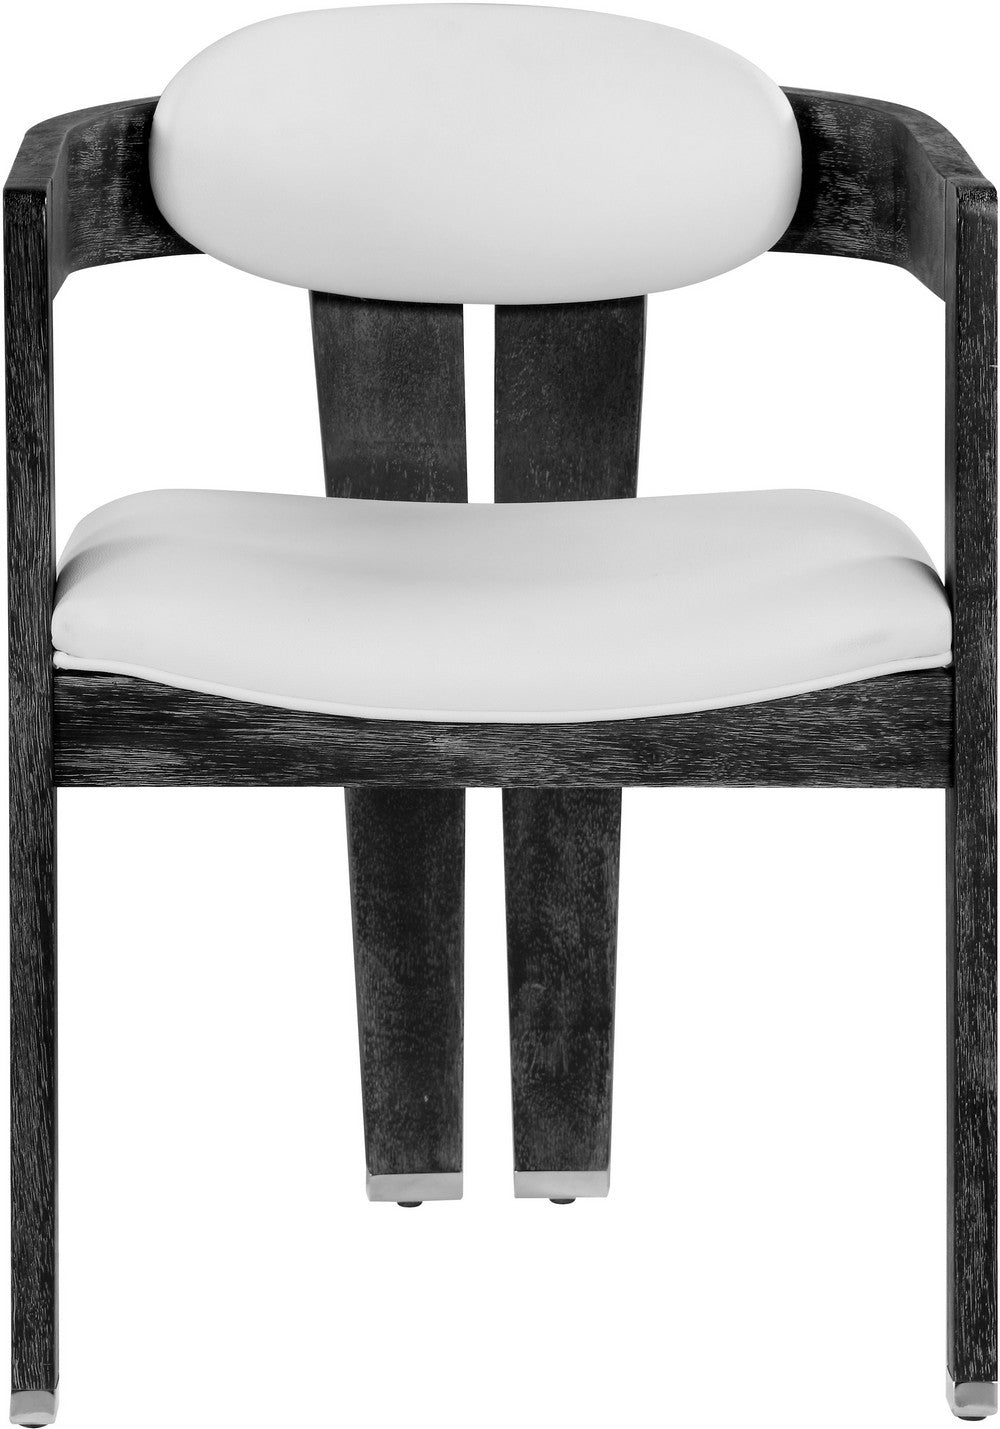 Meridian Furniture Vantage White Faux Leather Dining Chair